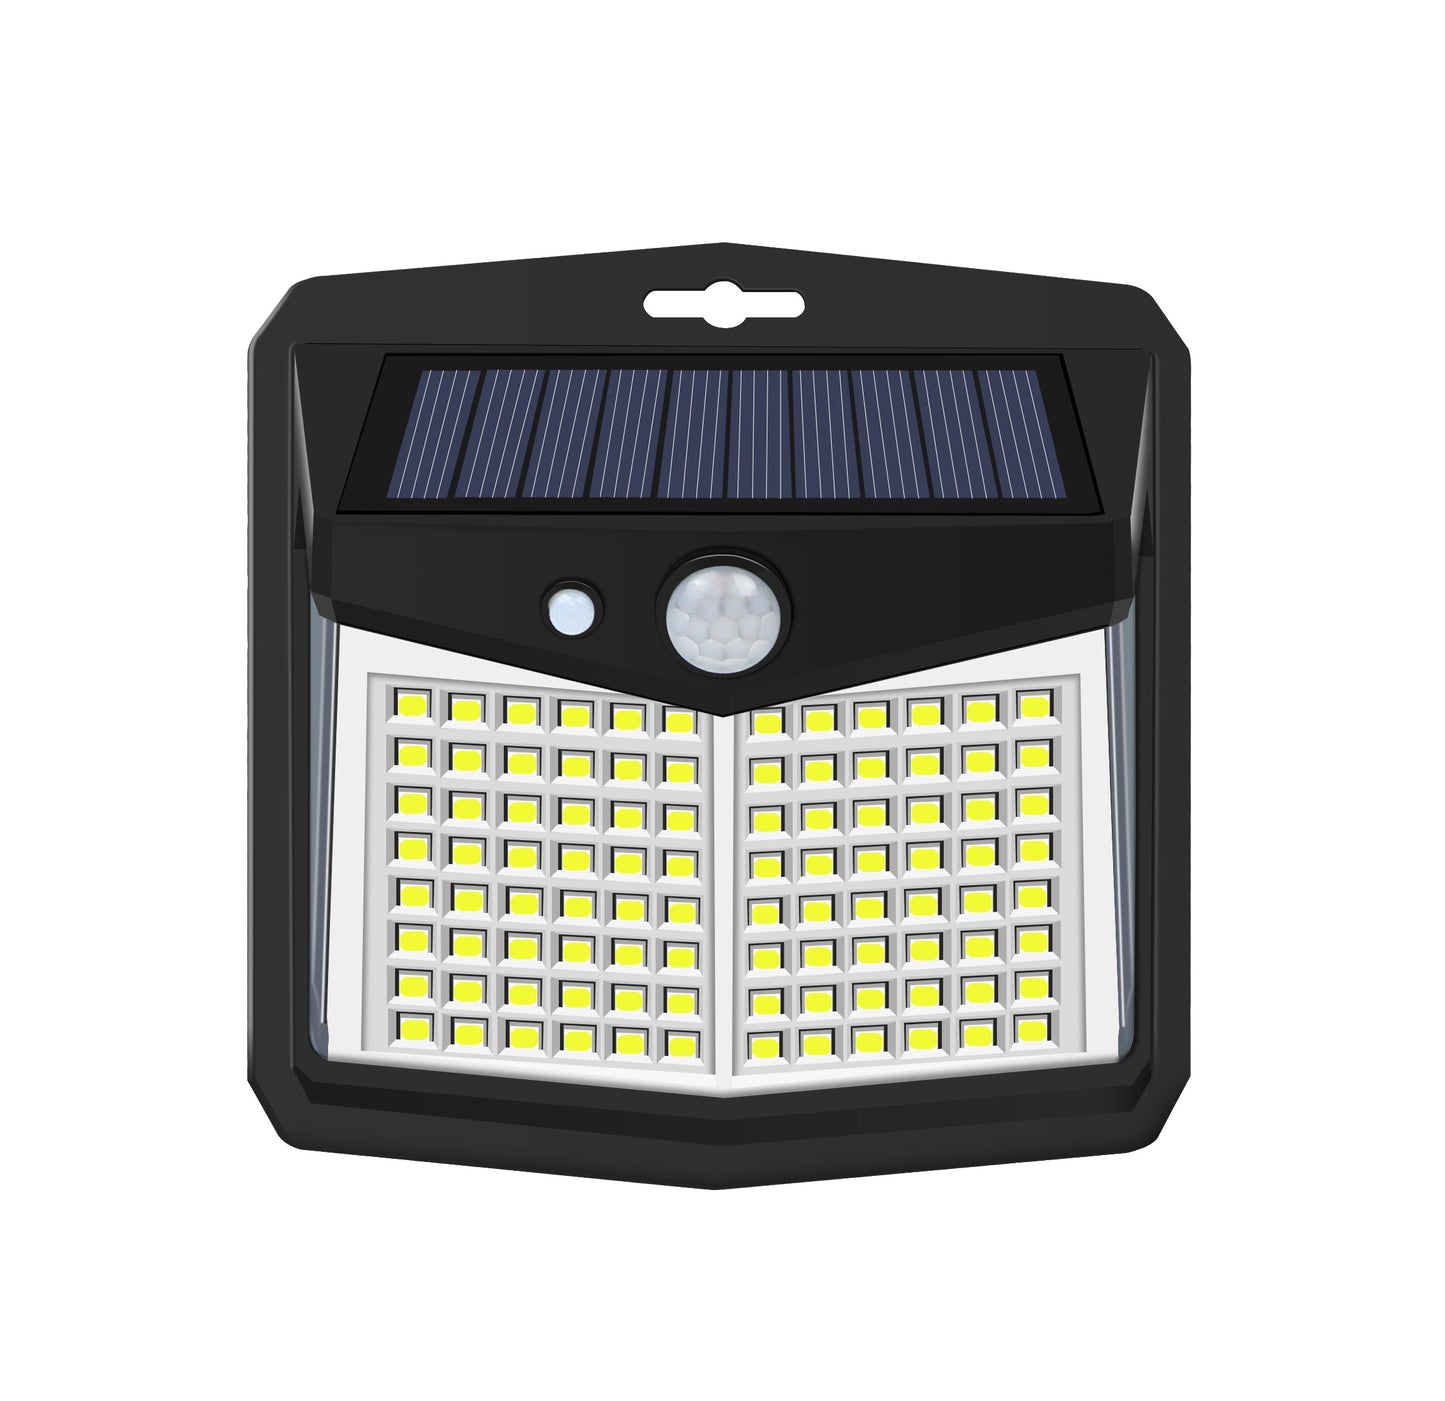 320 LED Solar Security Lights (Pack of 2) - 3-in-1 Sensor, Constant, Combination Lighting